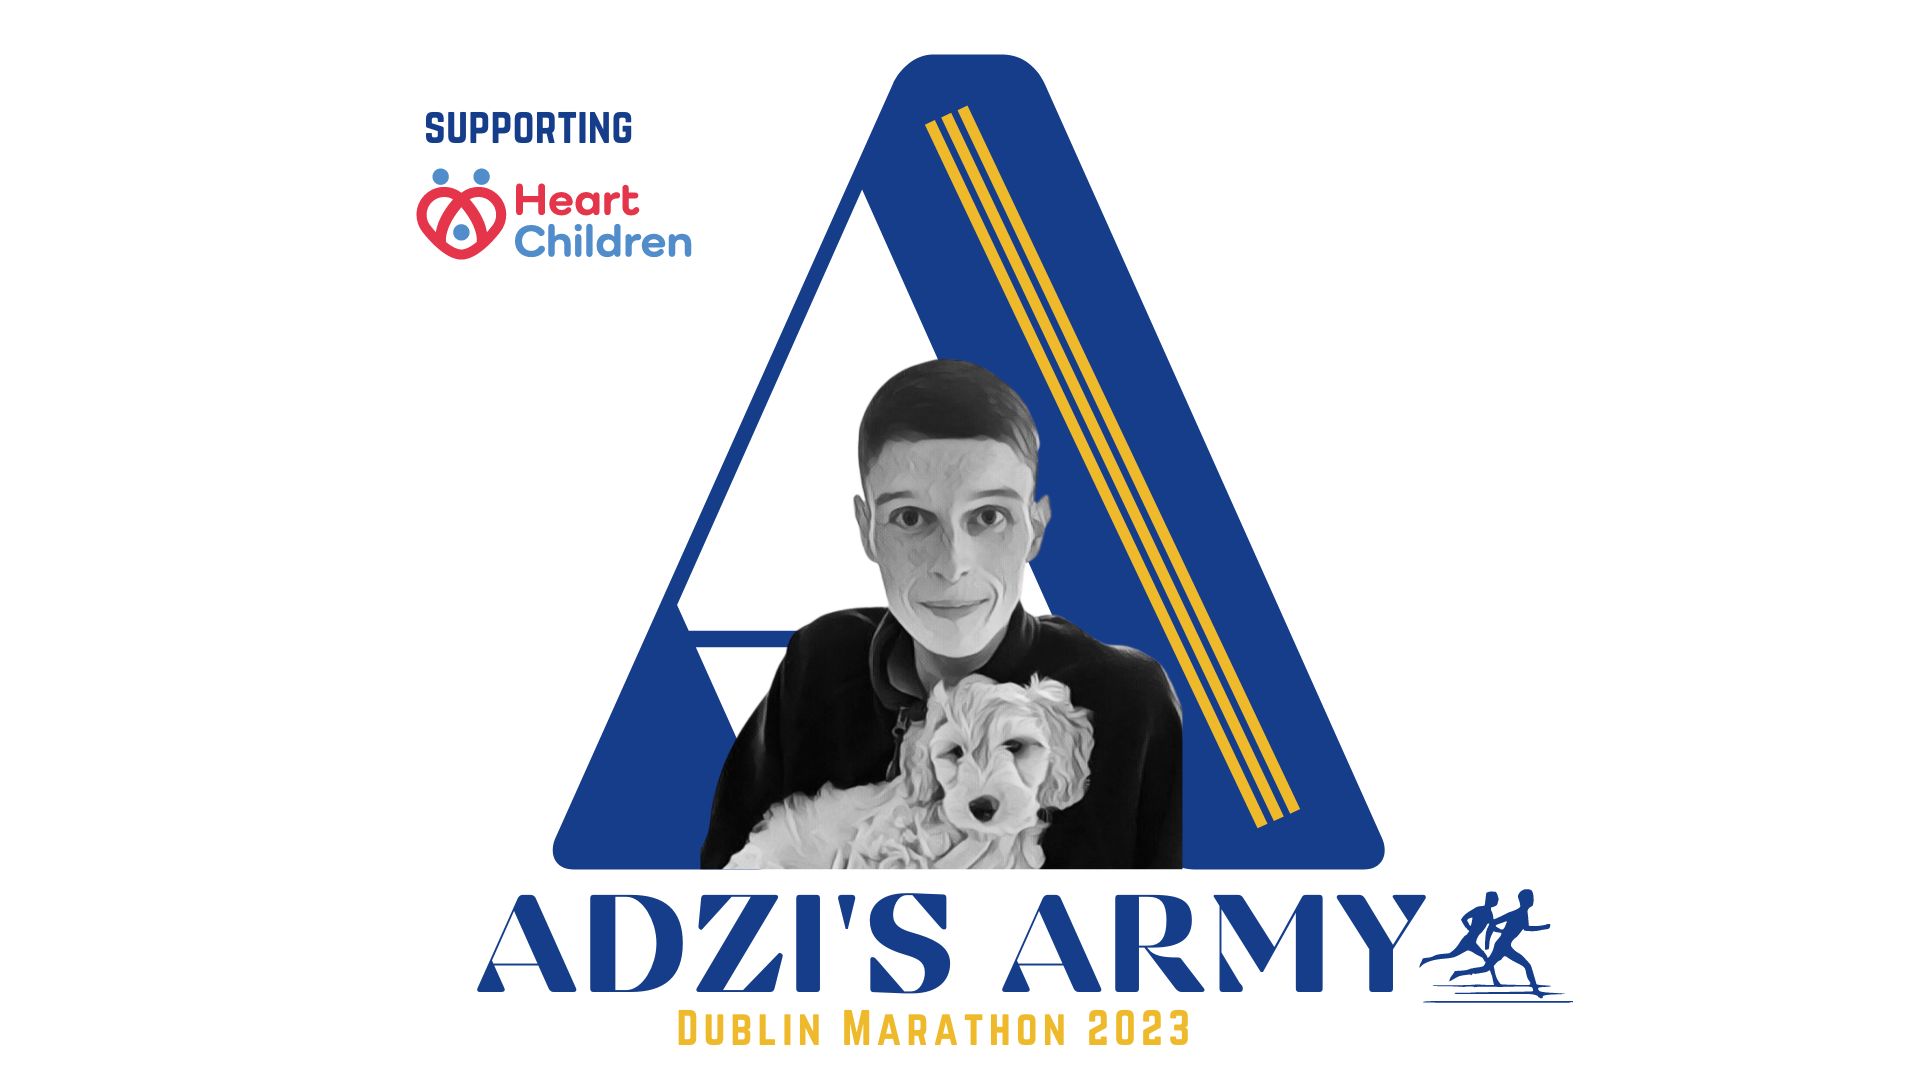 Adzi’s Army – In memory of Adam McGovern. Adam’s brother and 21 of his friends are running the Dublin Marathon this October in Adam’s memory.